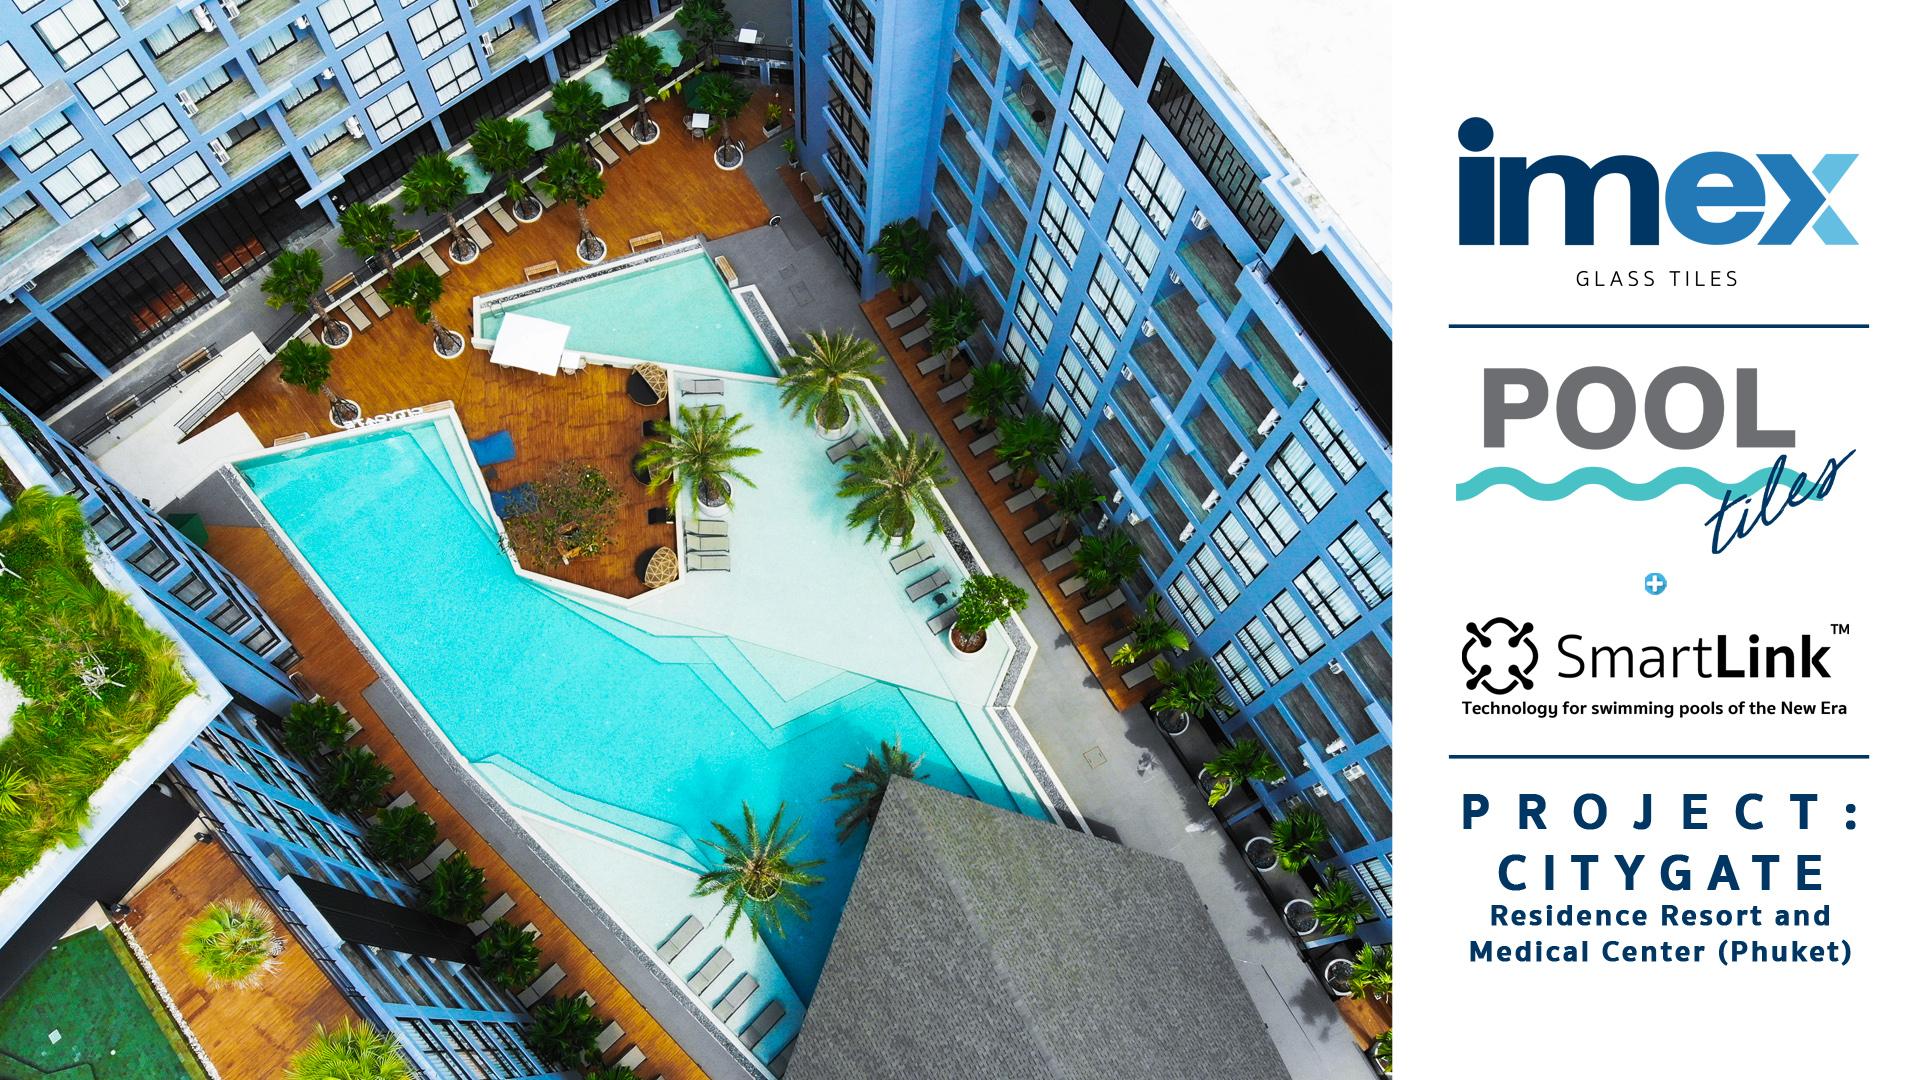 IMEX POOL TILES | Our glass mosaics are renowned for quality and internationally recognized standards, offering a wide range of surface techniques suited for all settings.